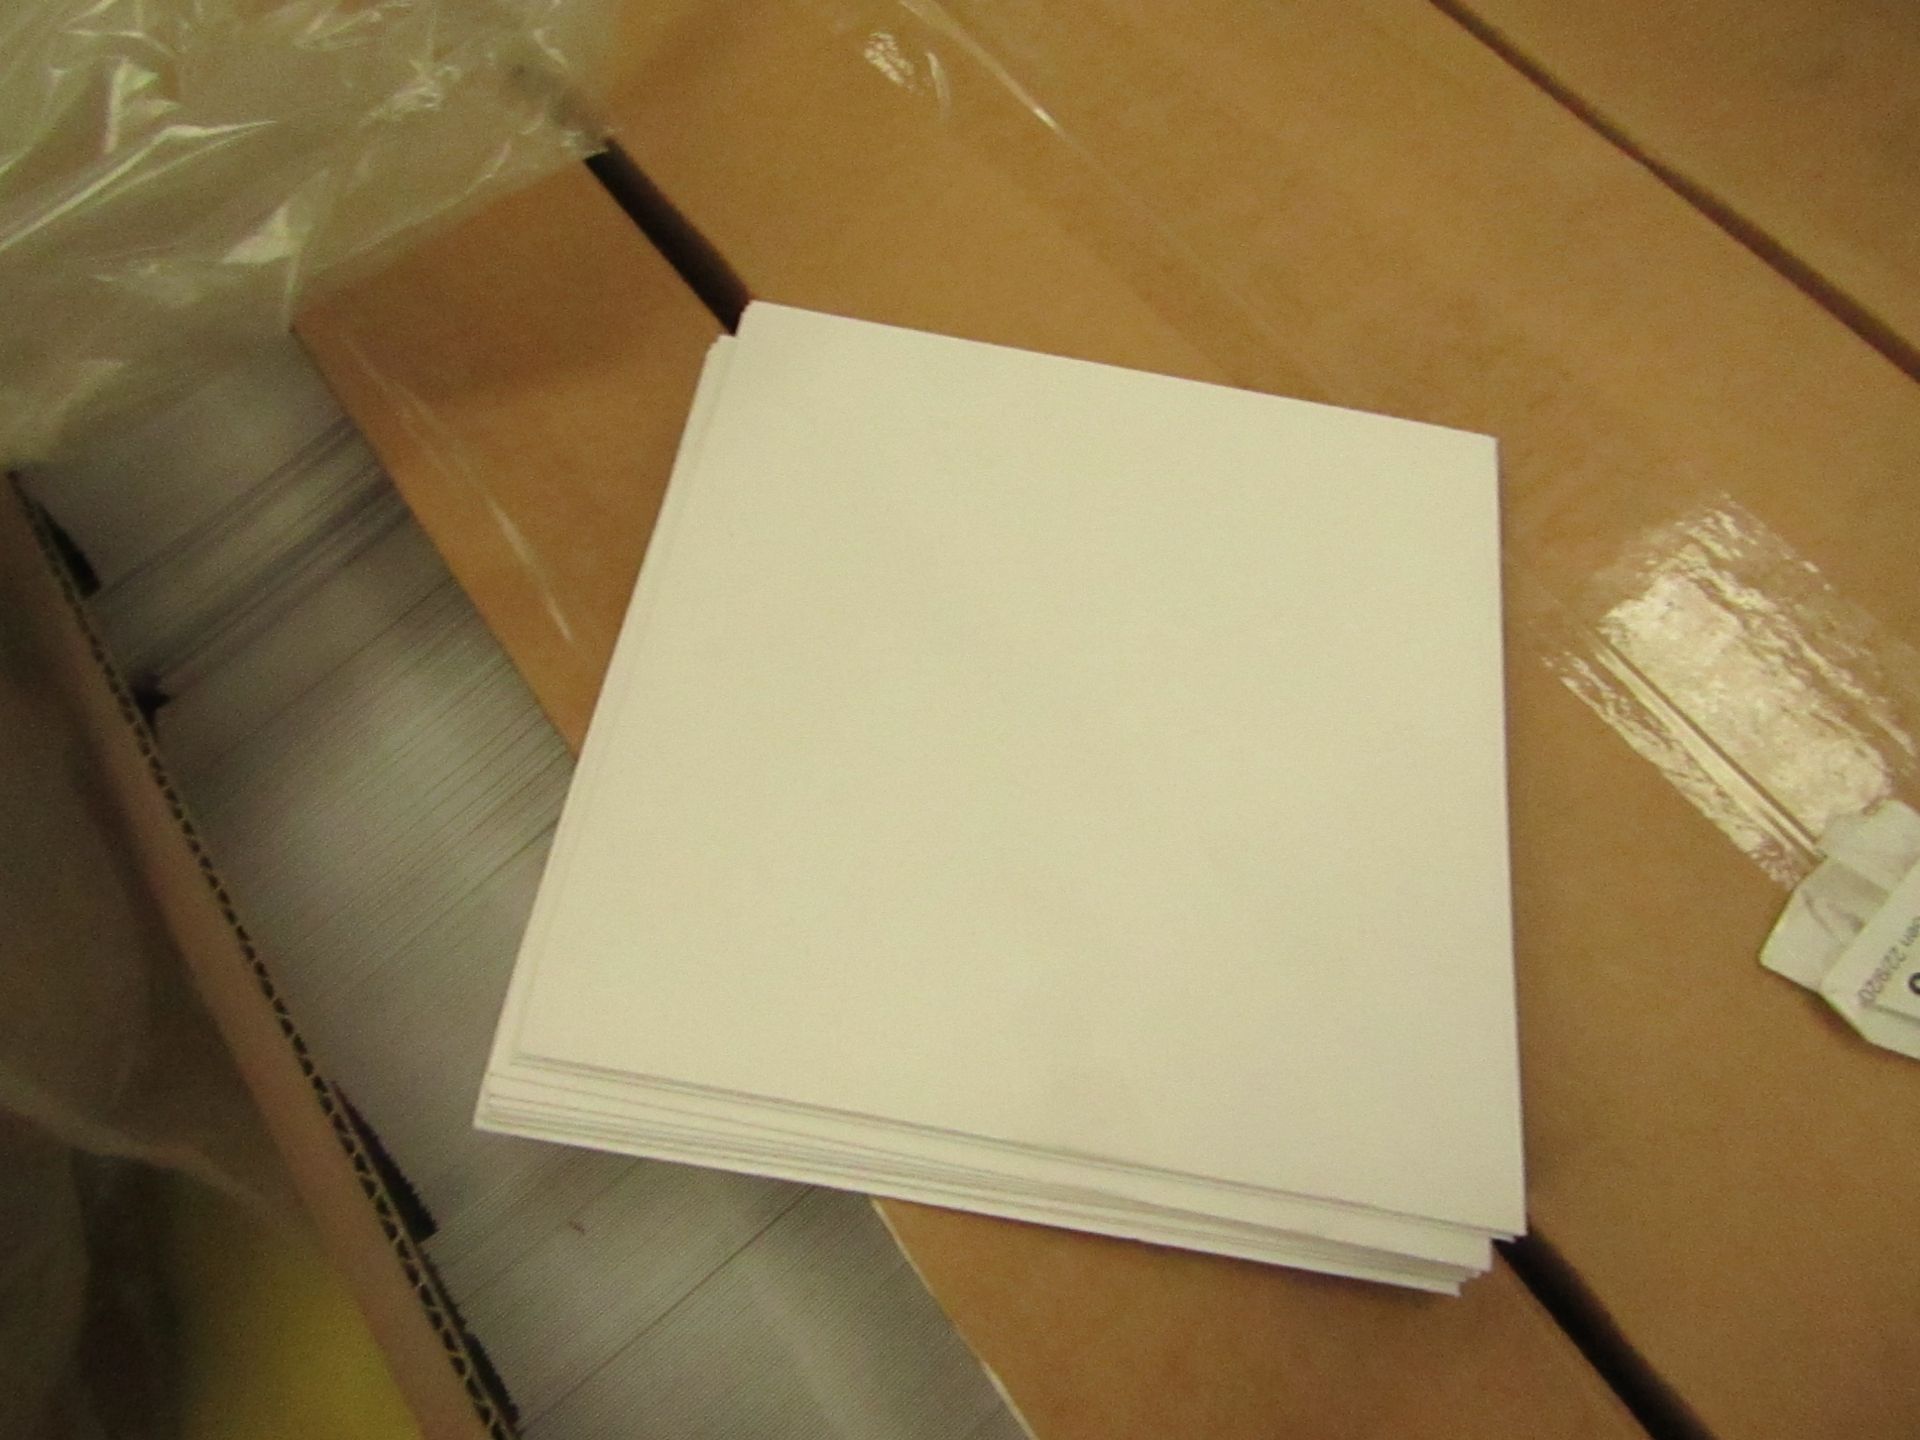 Pallet of Approx 30 boxes of 900 per box White Square 143mm x 143mm Envelopes - New & Boxed.